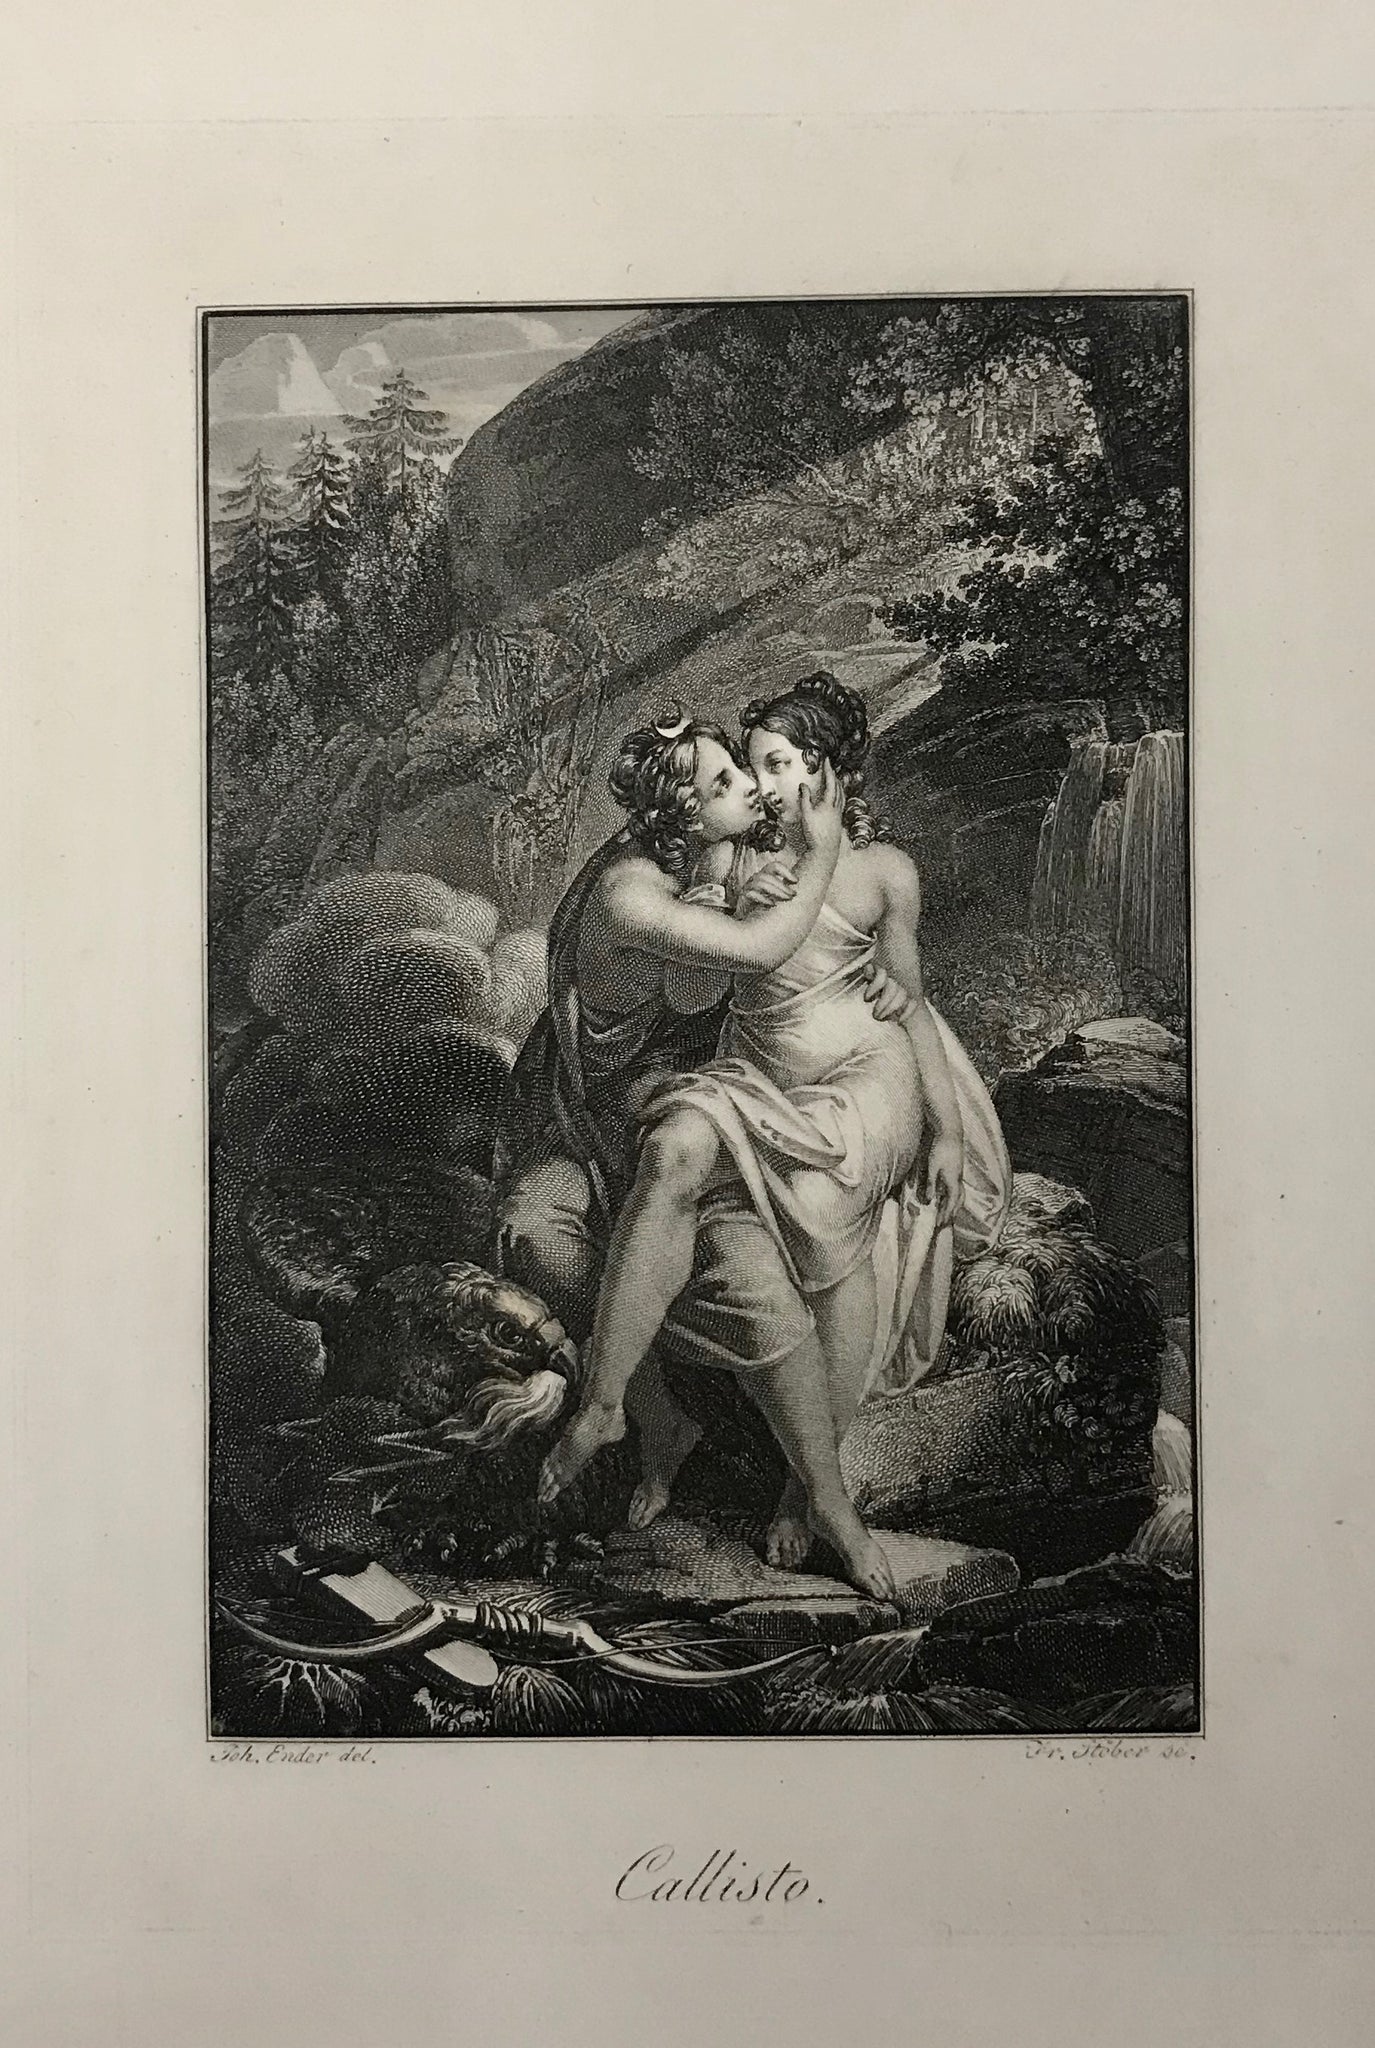 Cellist, Antique Prints of Classic Greek Mythology  The following copperplate engravings by Franz Xaver Stoeber (1795-1858) after Johann Nepomuck Ender (1793-1854),Loder, Schedy, are from "Zyklus der griechischen Mythology" published ca 1830.